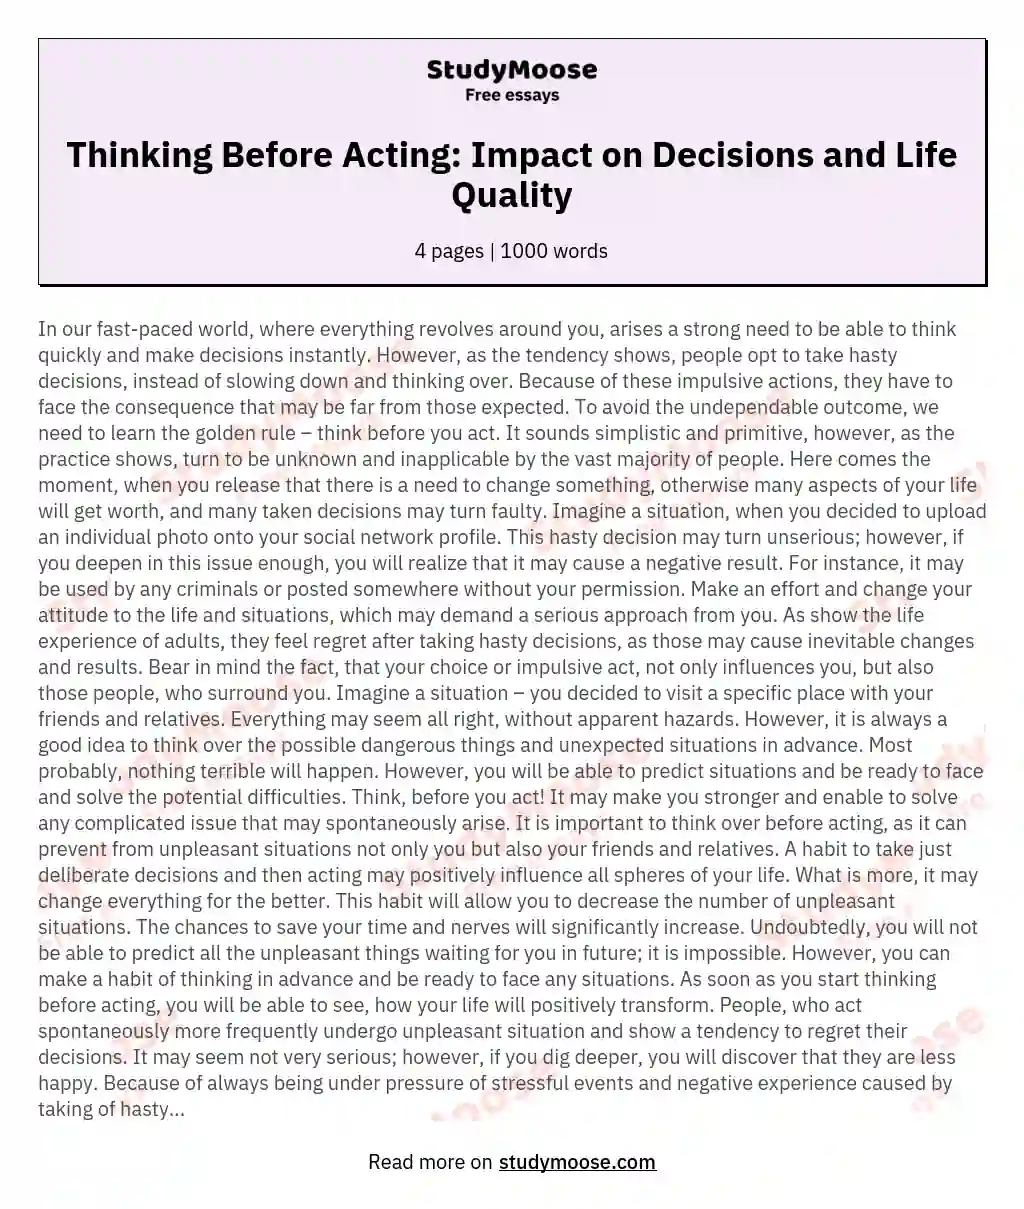 Thinking Before Acting: Impact on Decisions and Life Quality essay